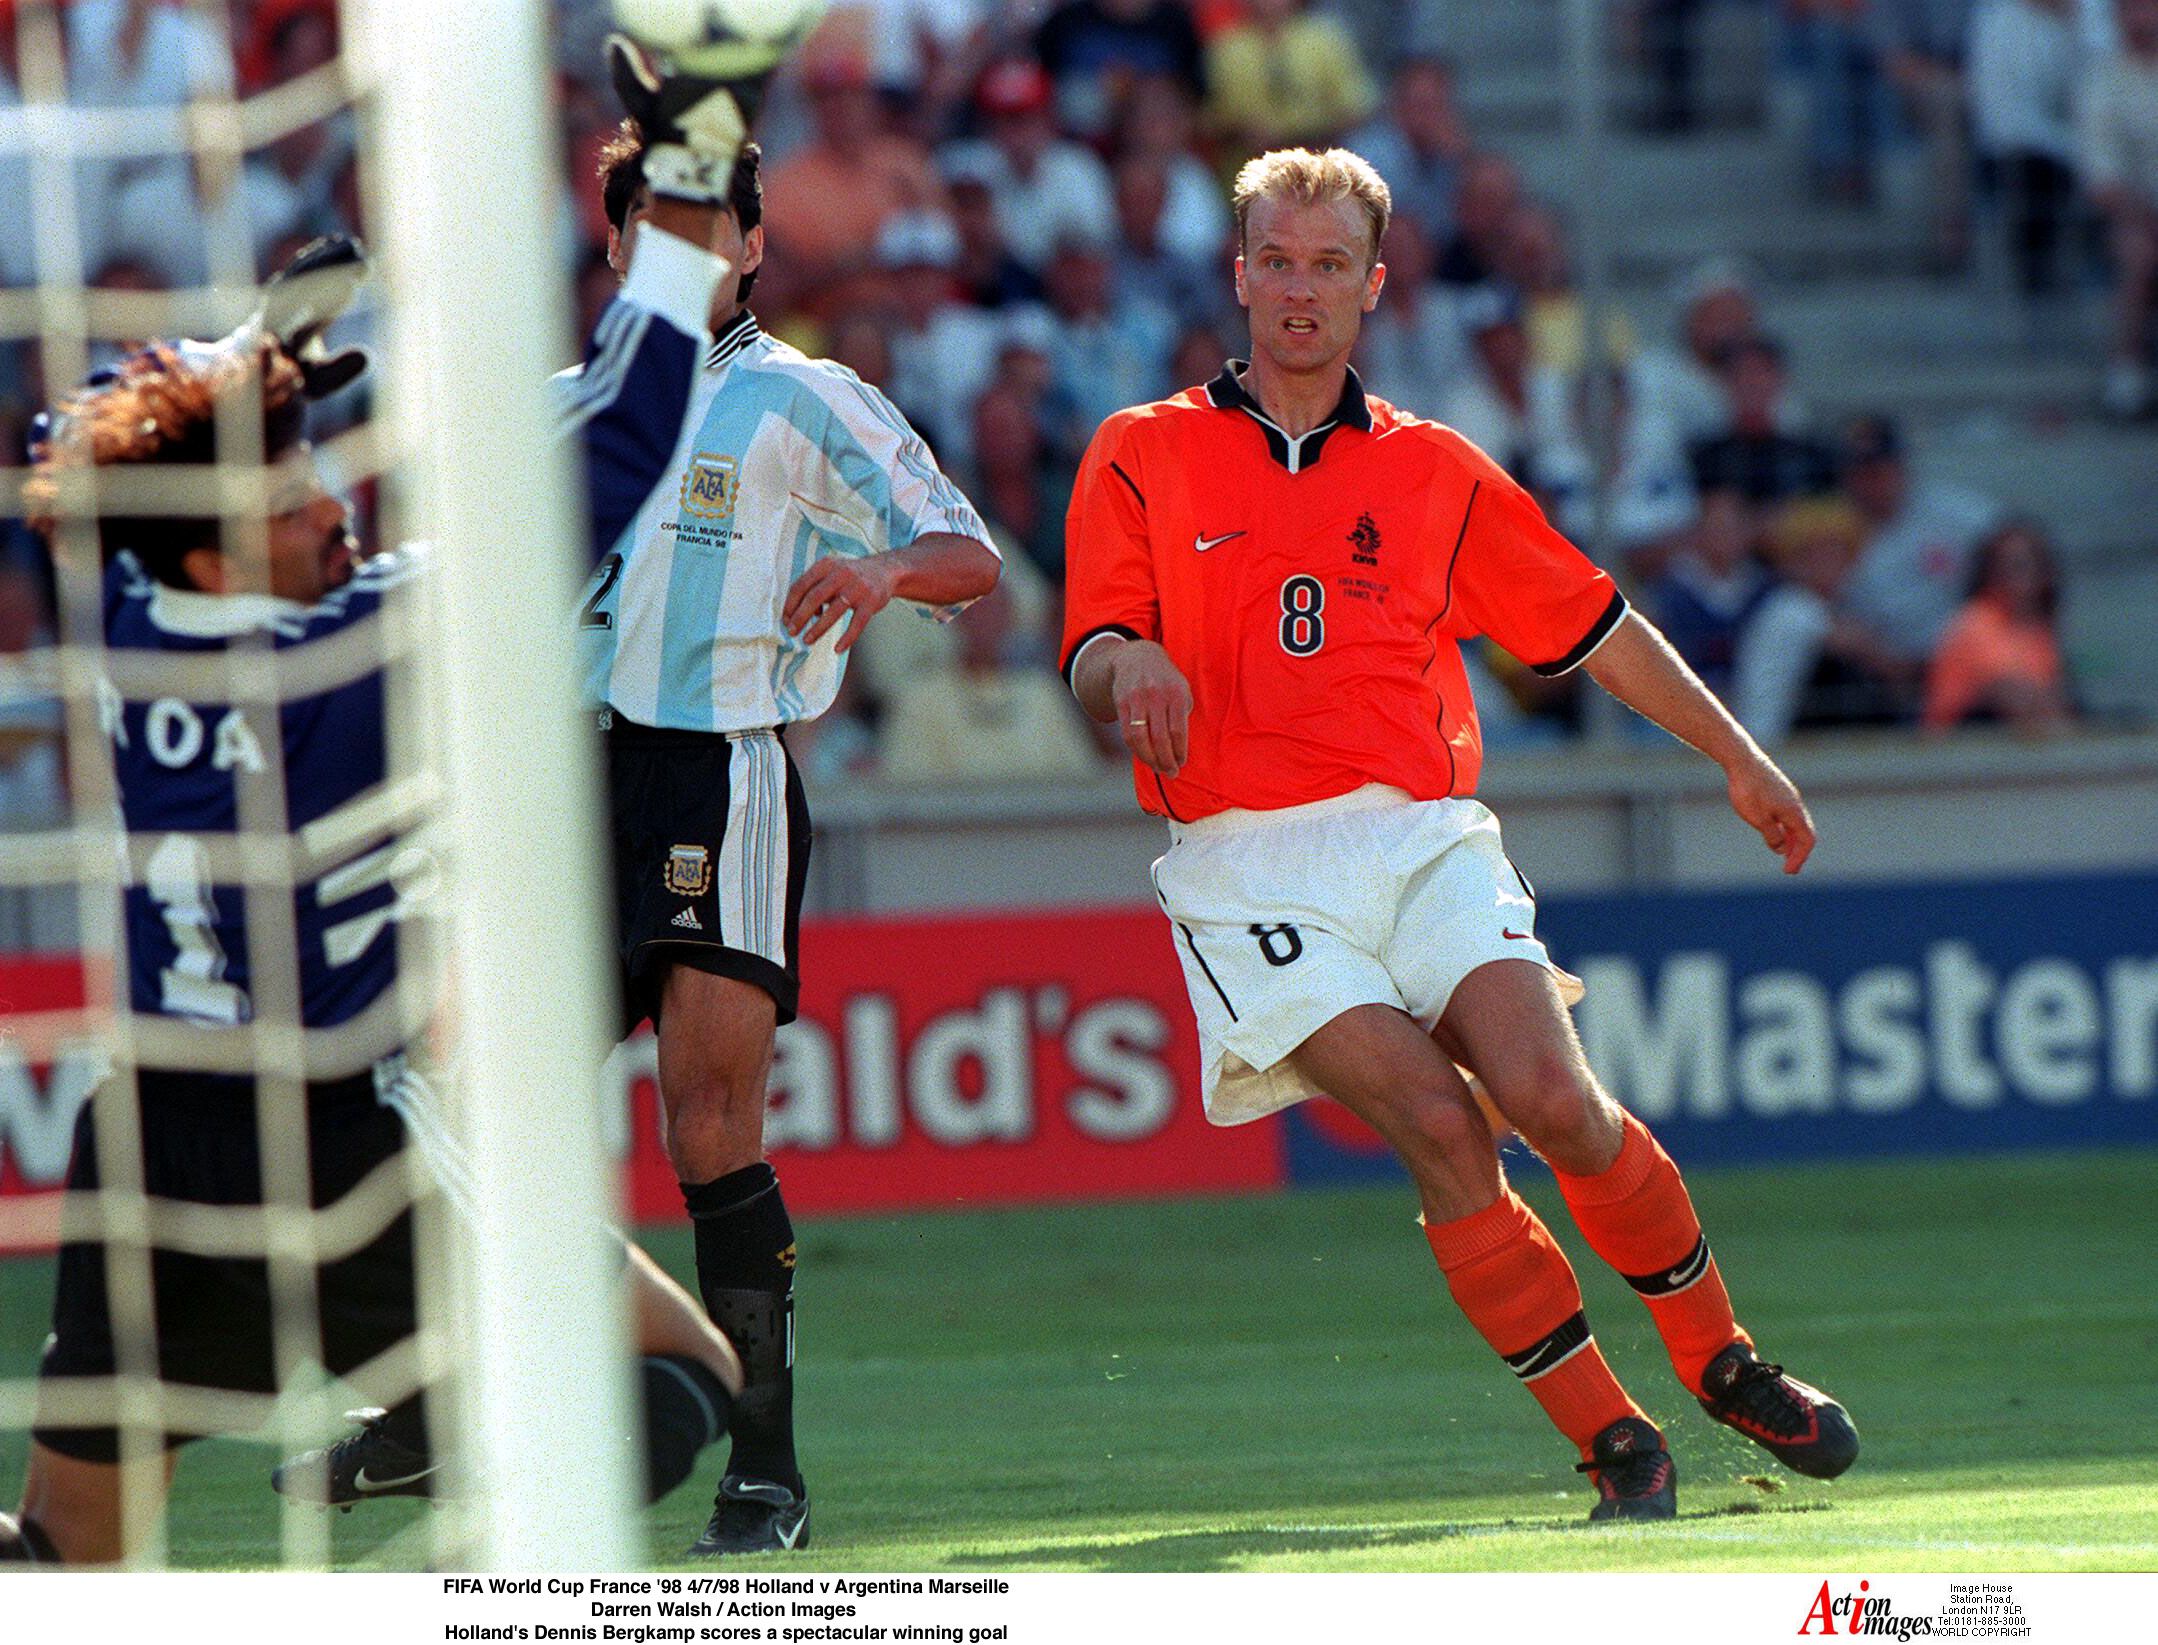 Bergkamp scores his iconic goal for the Netherlands.